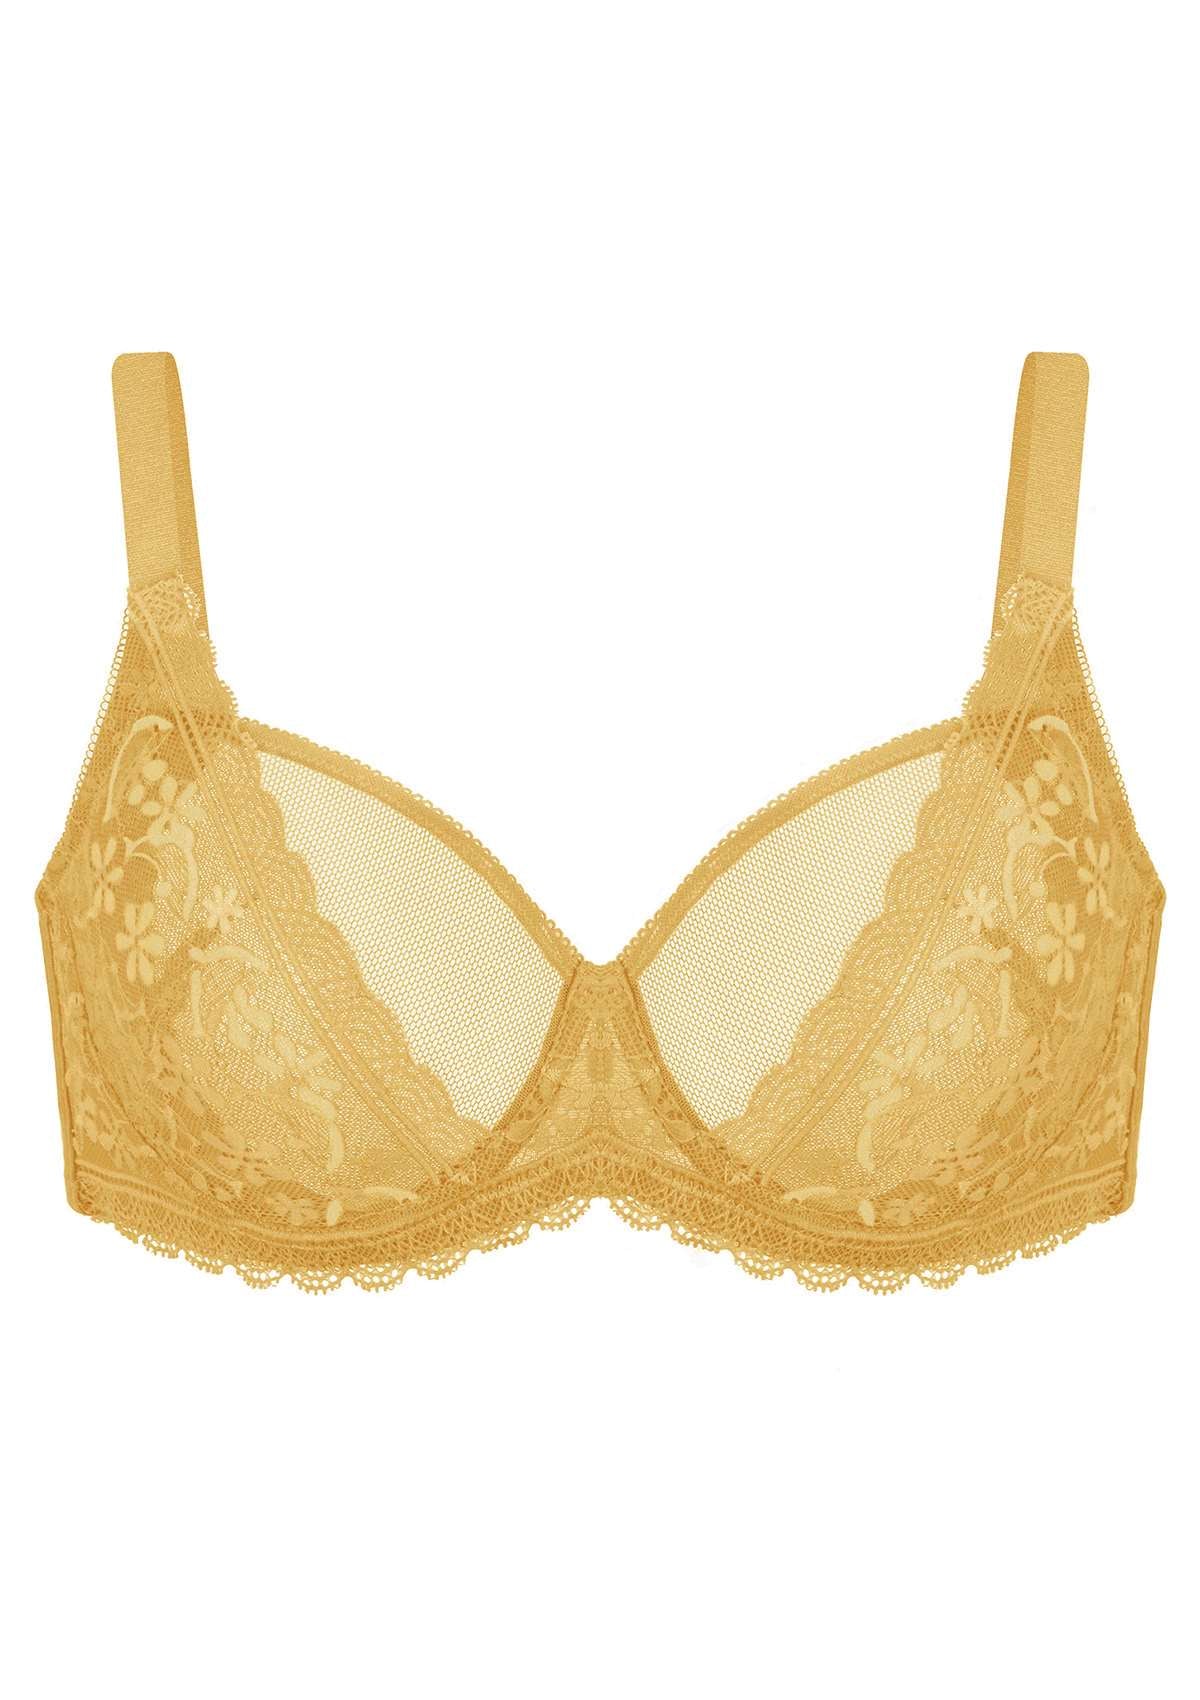 HSIA Anemone Lace Unlined Bra: Supportive, Lightweight Bra - Ginger / 38 / D